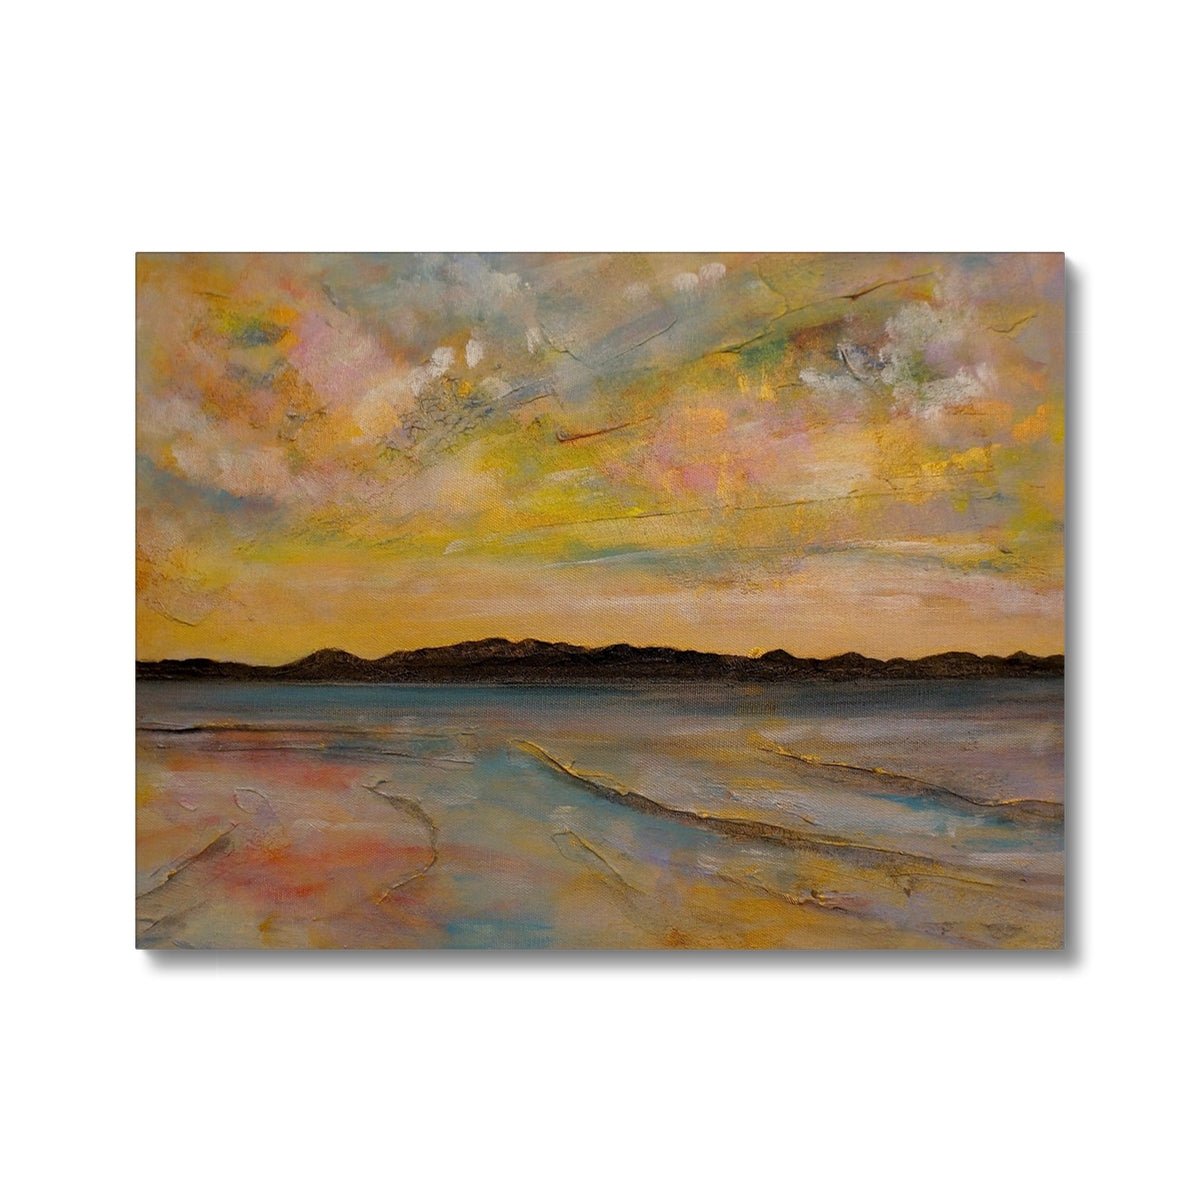 Vallay Island North Uist Painting | Canvas From Scotland-Contemporary Stretched Canvas Prints-Hebridean Islands Art Gallery-24"x18"-Paintings, Prints, Homeware, Art Gifts From Scotland By Scottish Artist Kevin Hunter